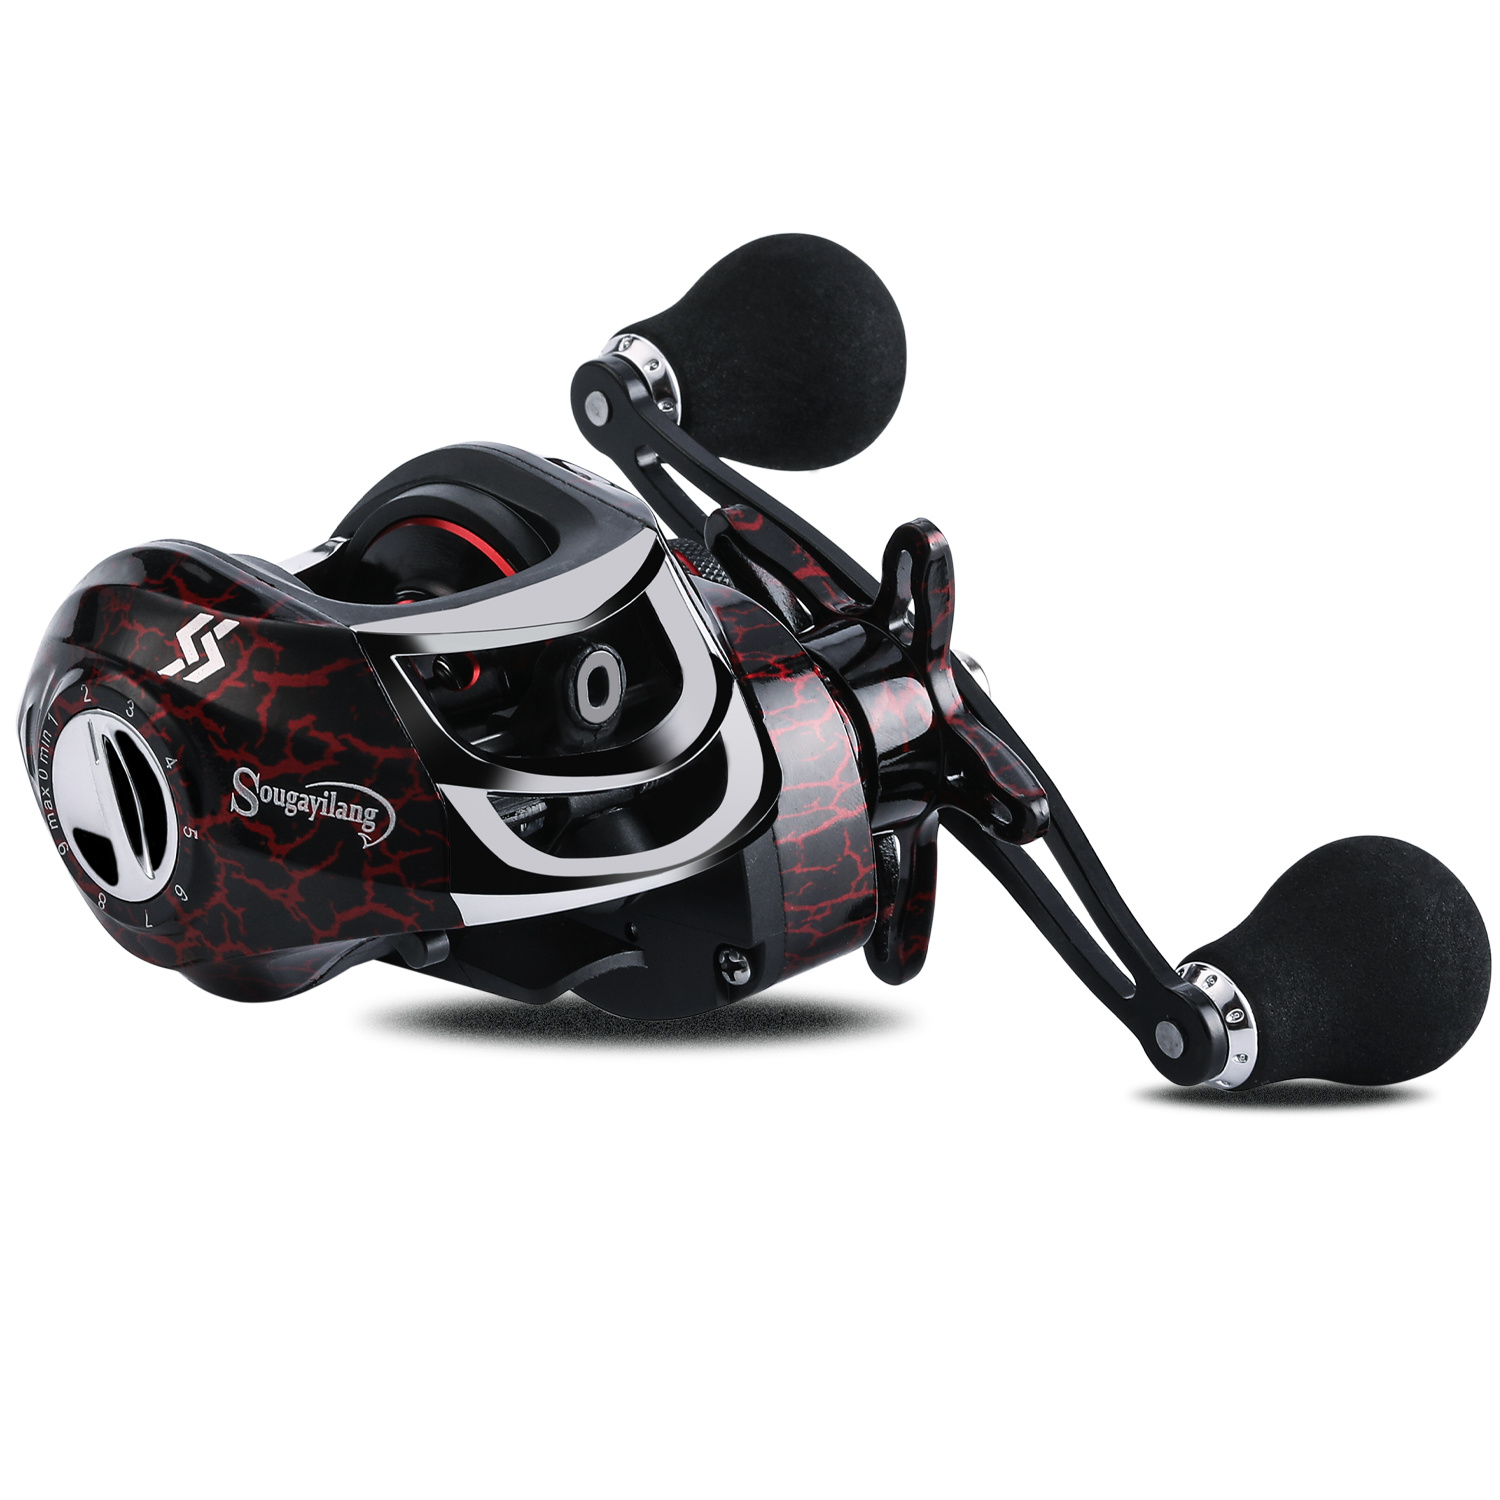 Sougayilang New Baitcasting Reel 7.2:1 High Speed 18+1BB with EVA Handle  for Casting Rod In Fresh Environment 48Hours Cheap Reel - AliExpress